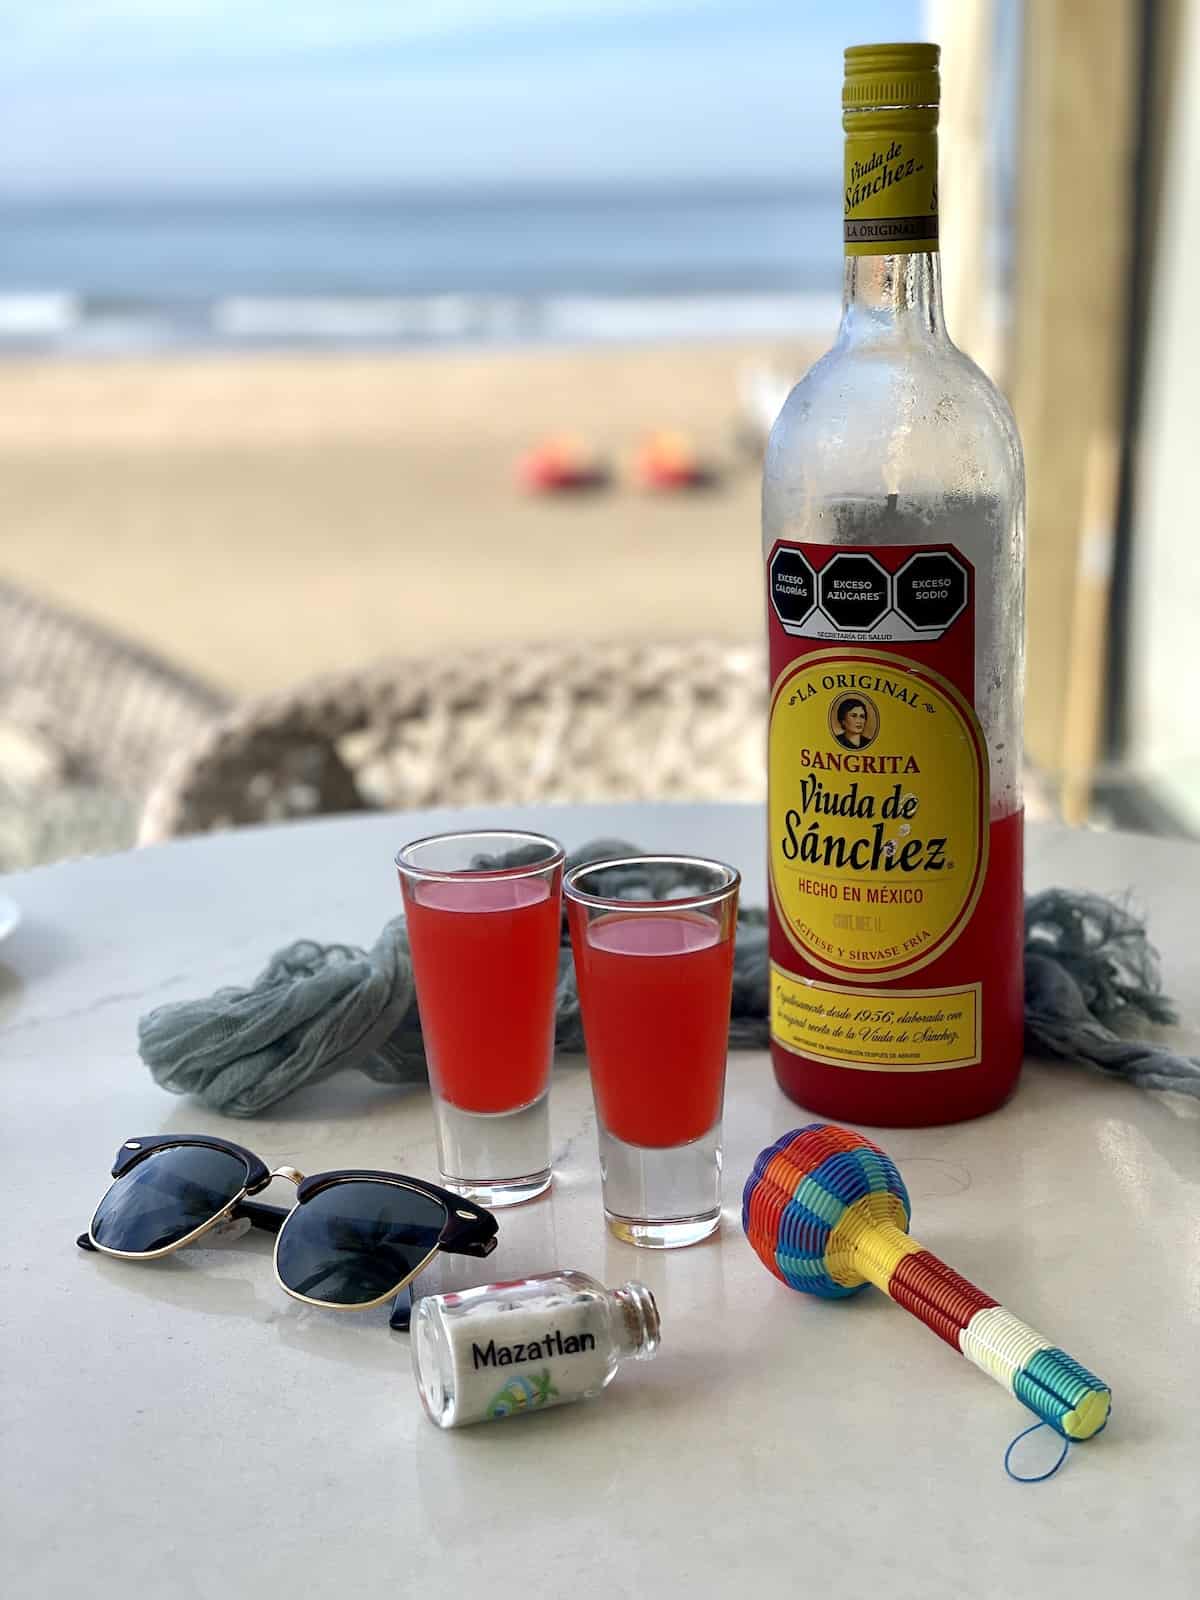 Bottle of Sangrita on white table with sunglasses and souvenirs.